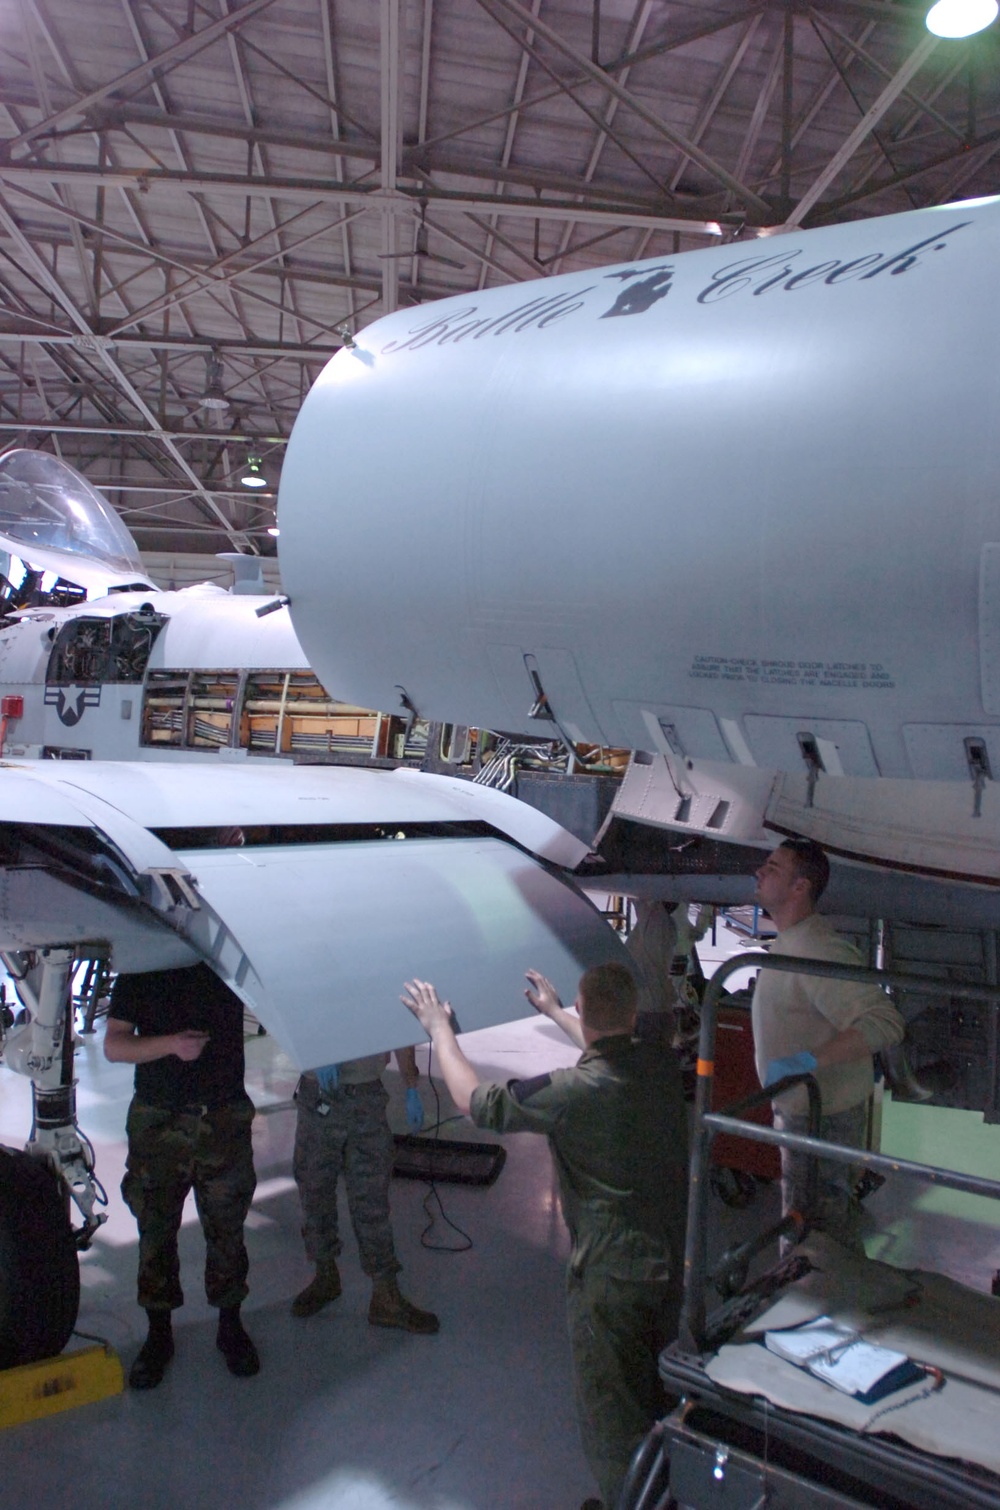 New mission, new plane, new friends – Michigan Air Guard A-10 unit learning from Maryland